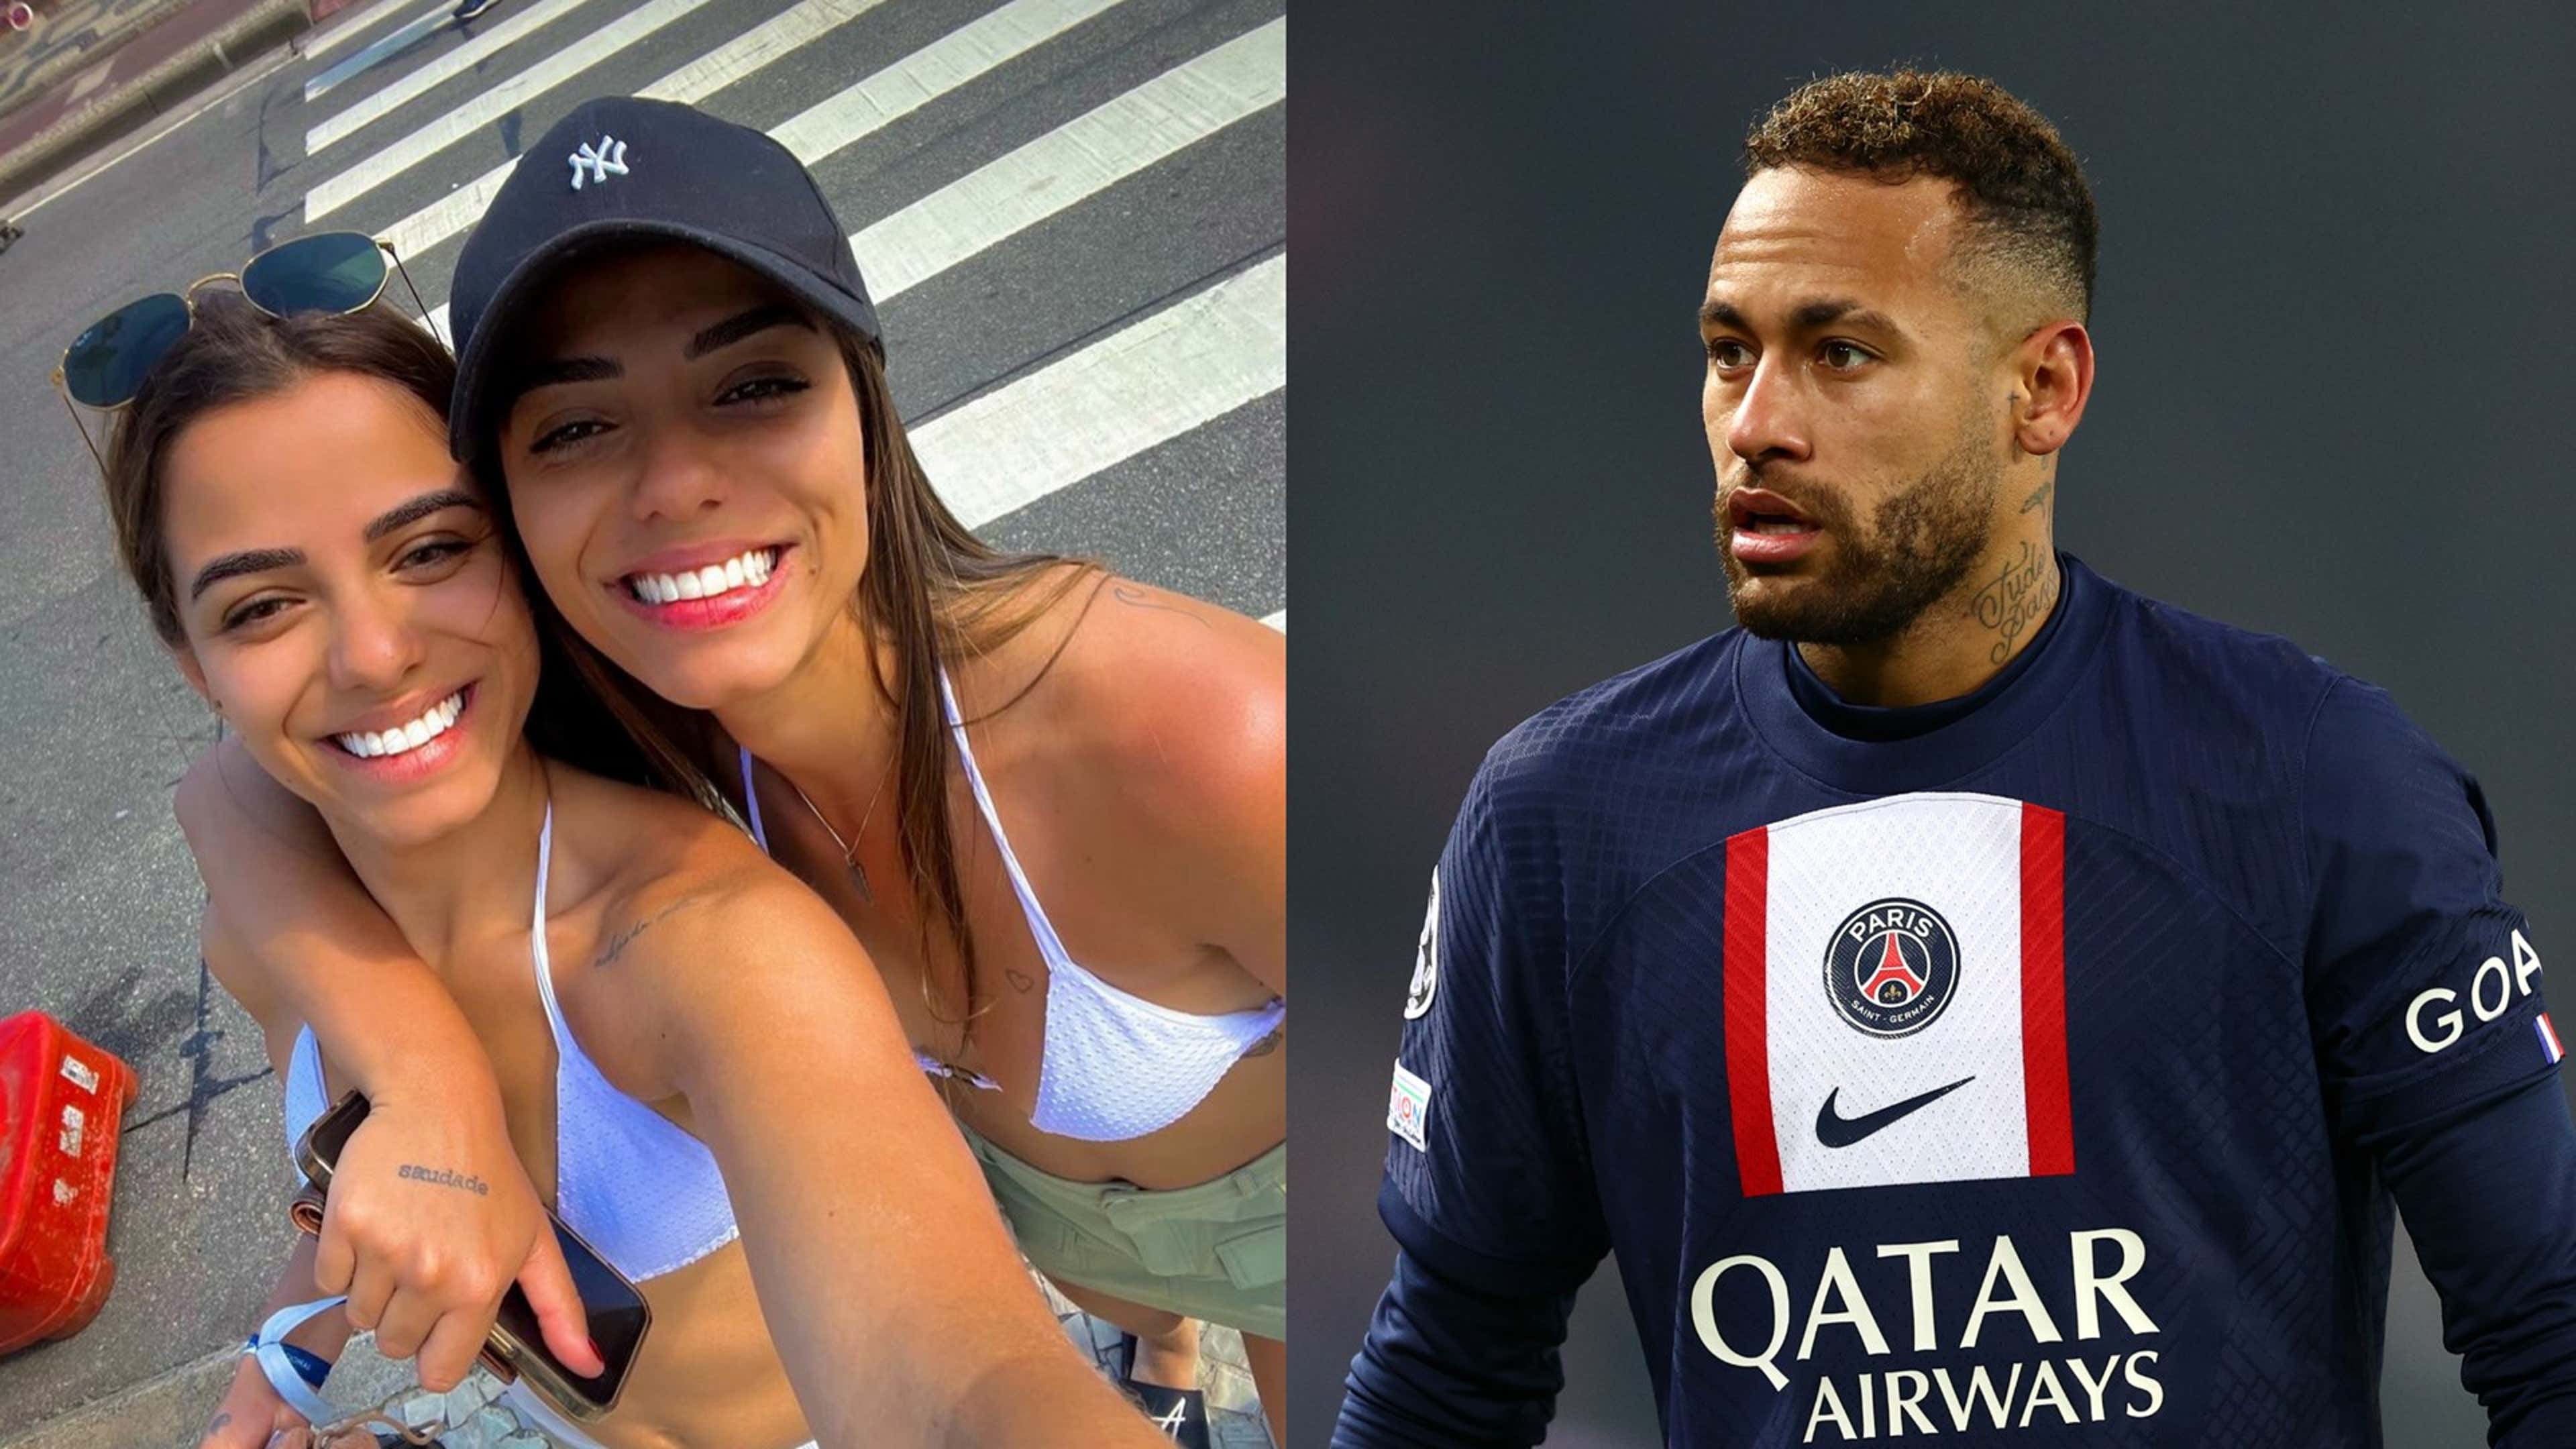 Brazil Brother And Sister Xxx Video - Neymar asked for sex with both of us' - OnlyFans model Key Alves reveals  PSG star's alleged threesome request involving twin sister | Goal.com